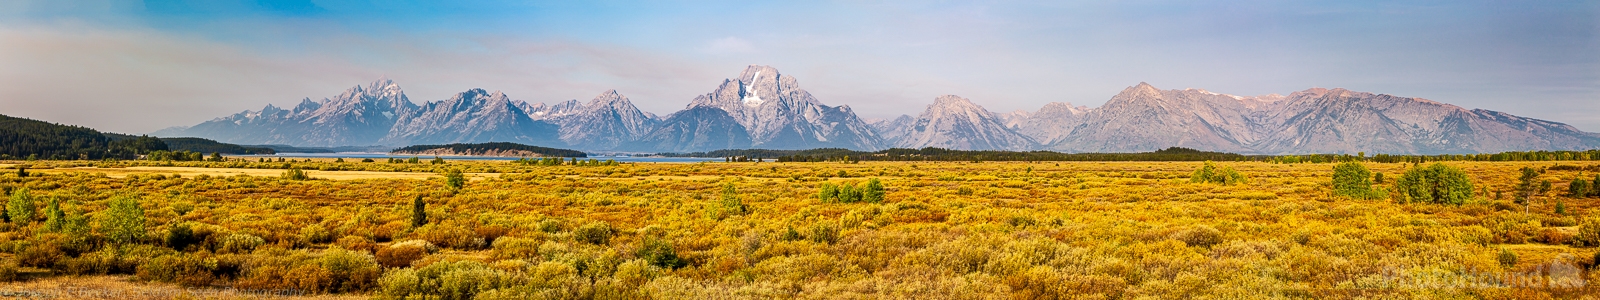 Willow Flats Overlook from the PhotoHound Guide to Grand Teton National Park